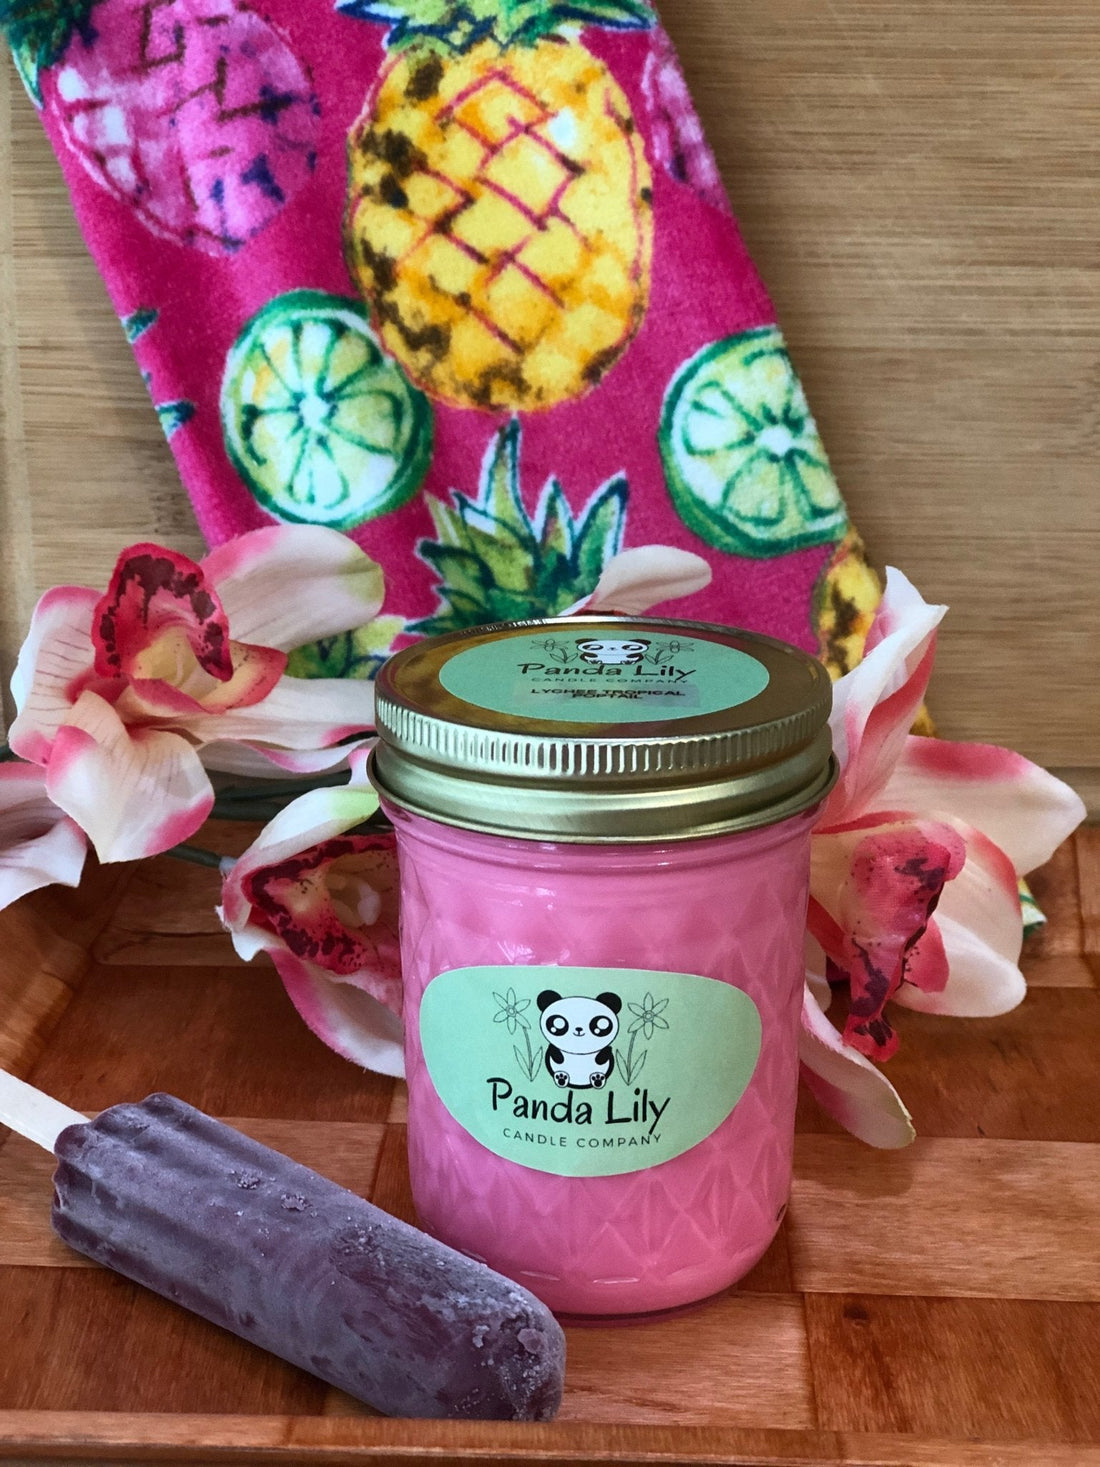 Summer Time Candles - Panda Lily Candle Company